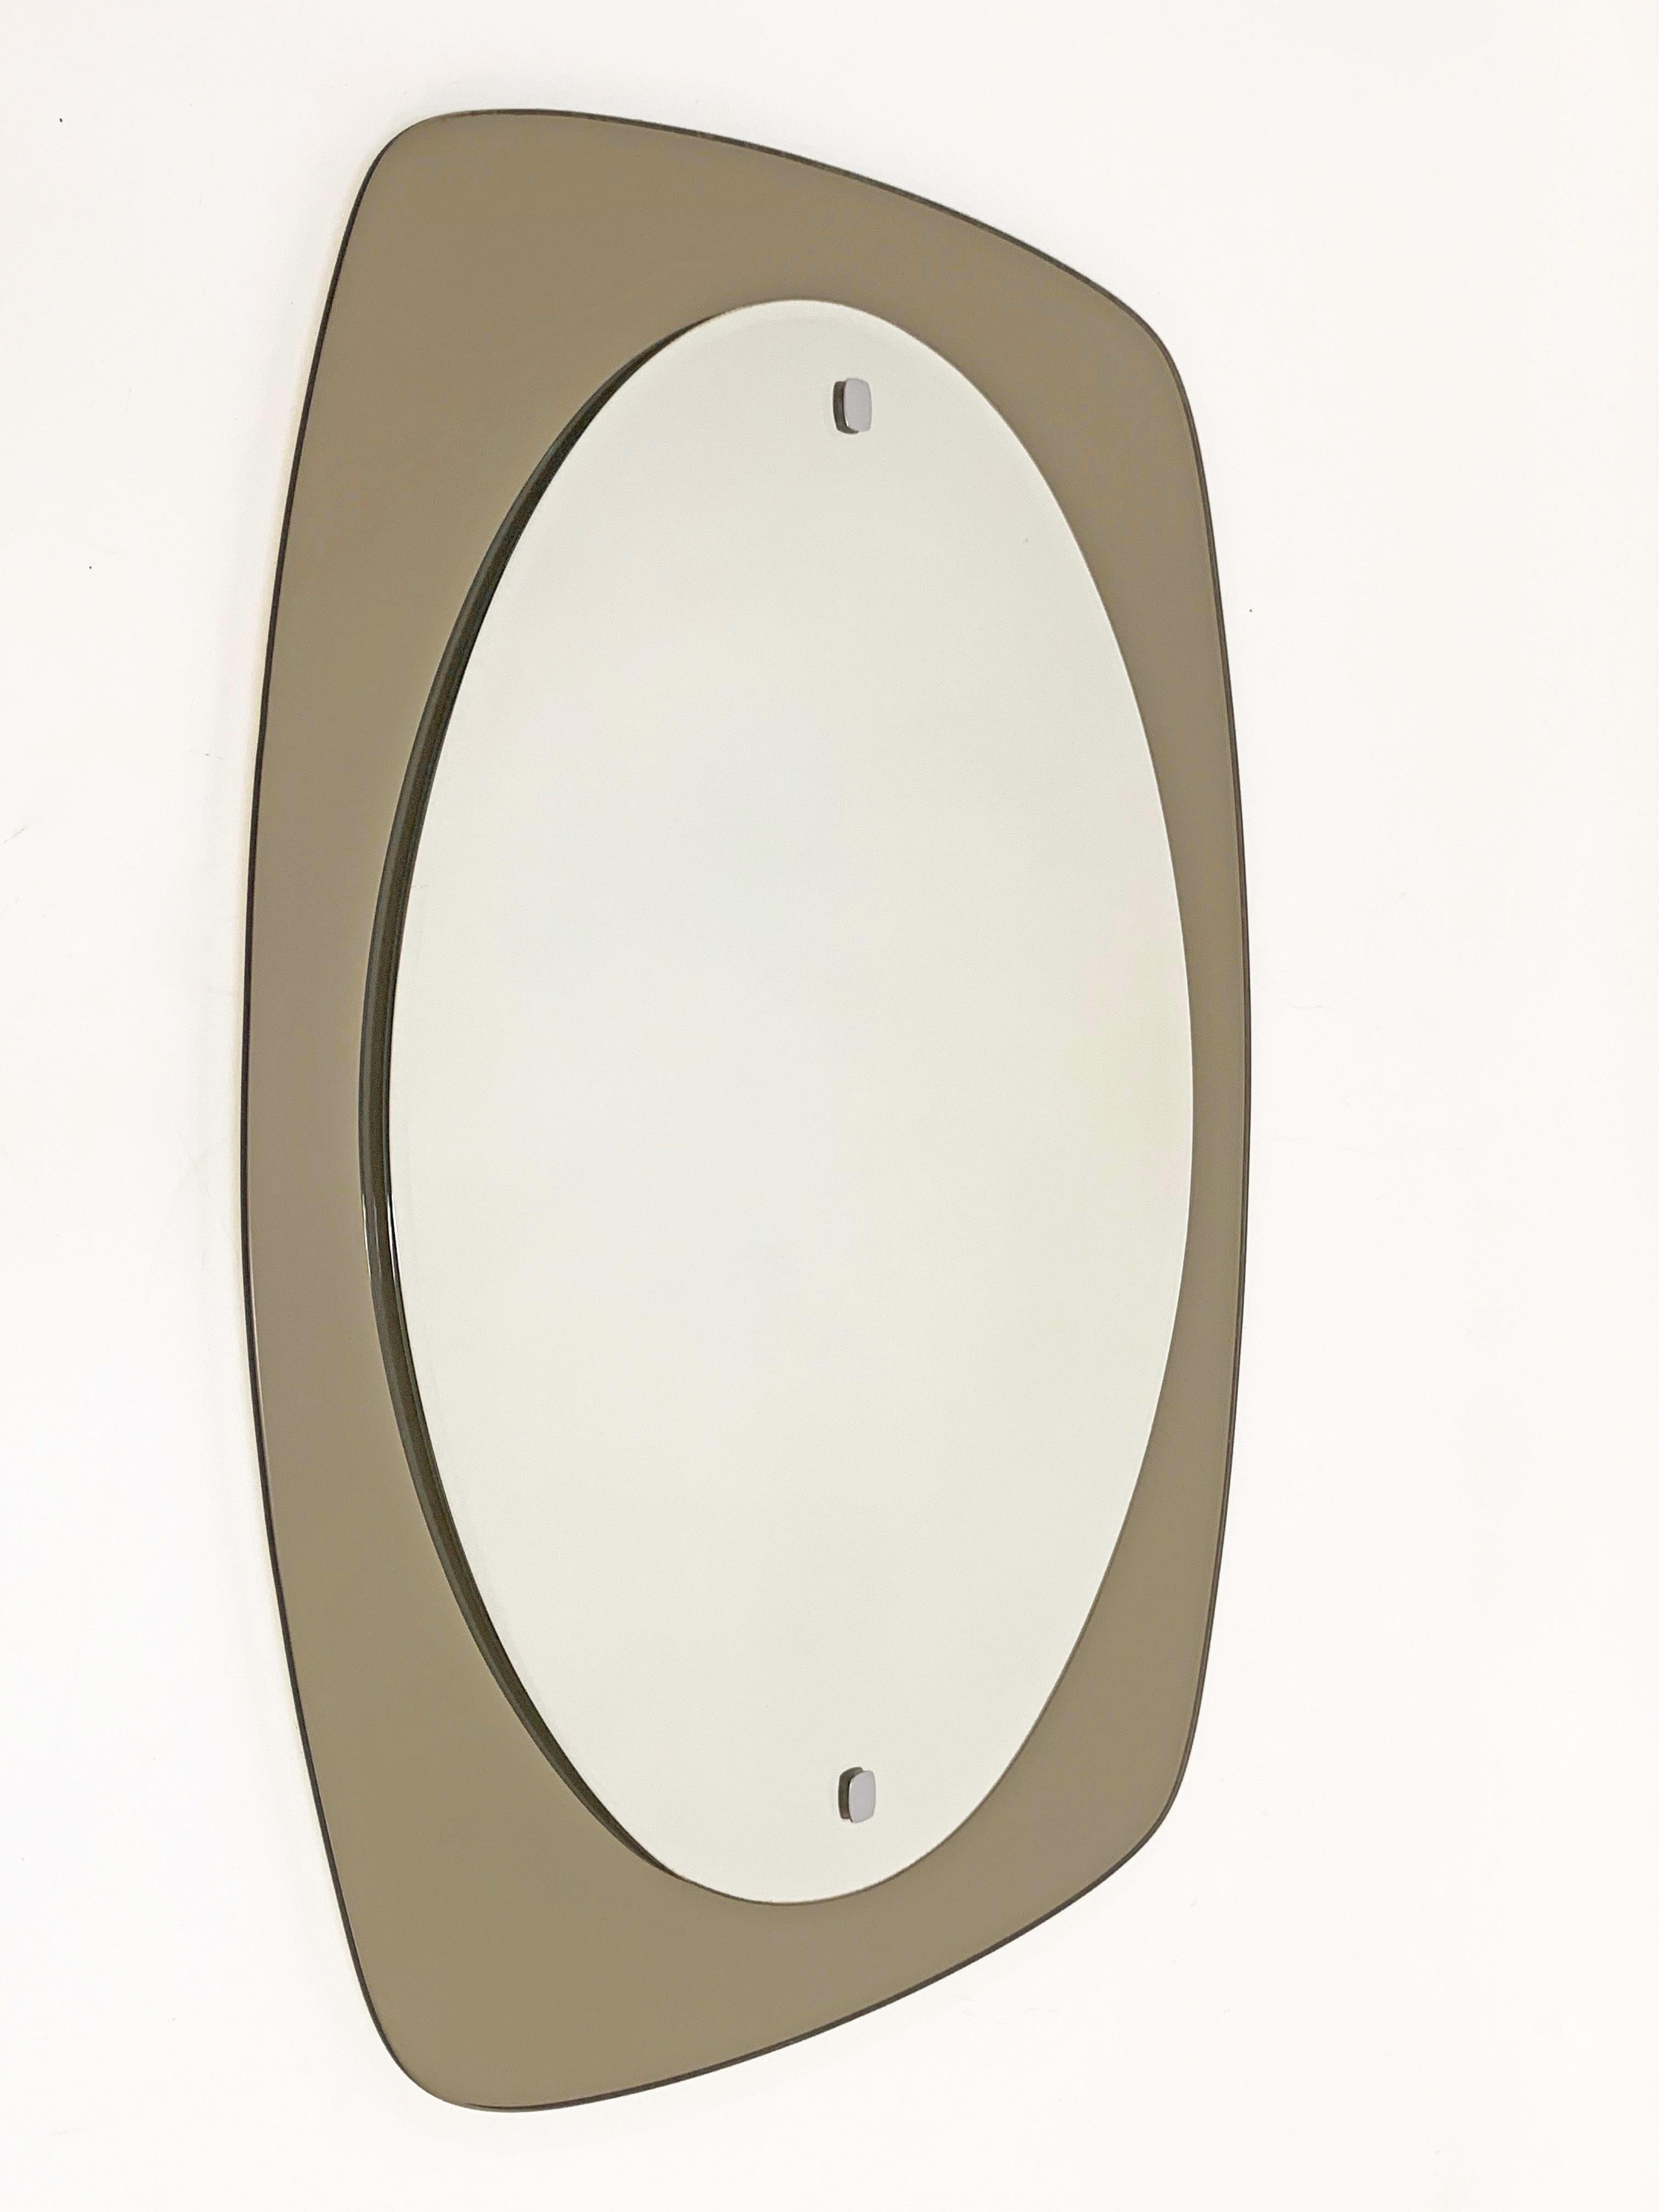 Late 20th Century Veca Midcentury Italian Oval Wall Mirror with Bronzed Glass Frame, 1970s